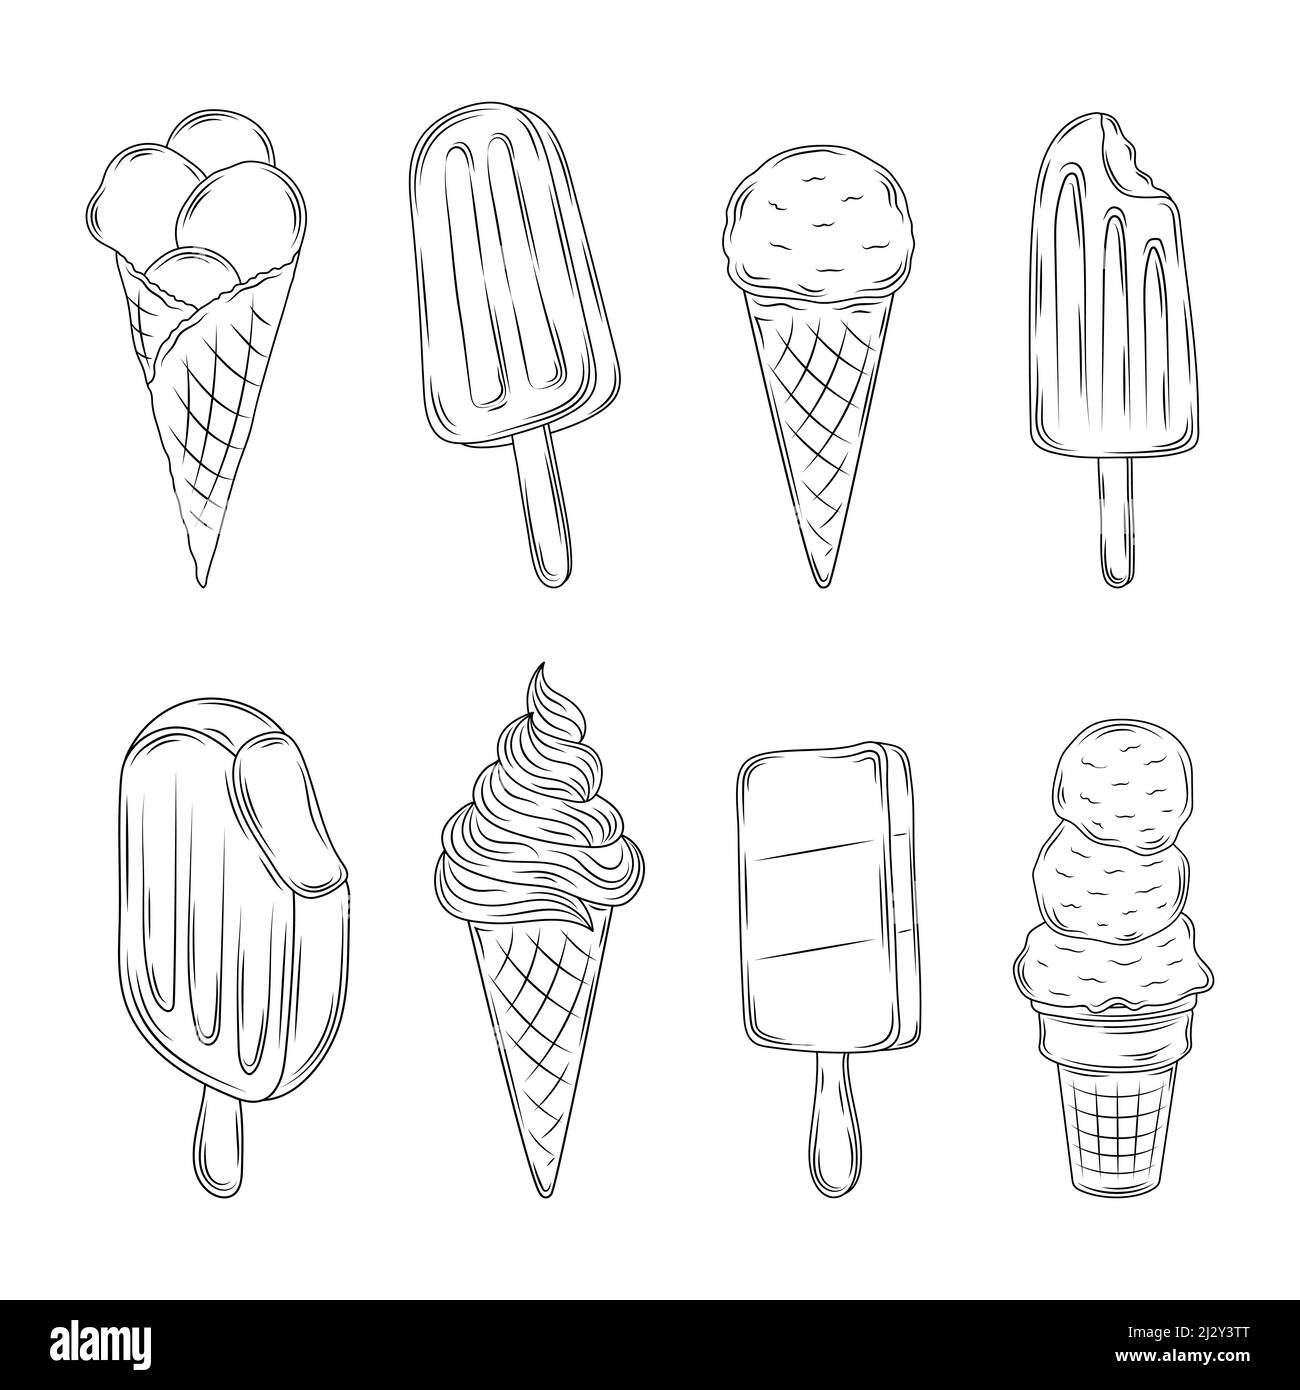 Vintage ice cream. Sketch icecream objects, hand drawn ice creams pie and stick, vanilla cone and sundae bowl desserts, vector illustration Stock Vector